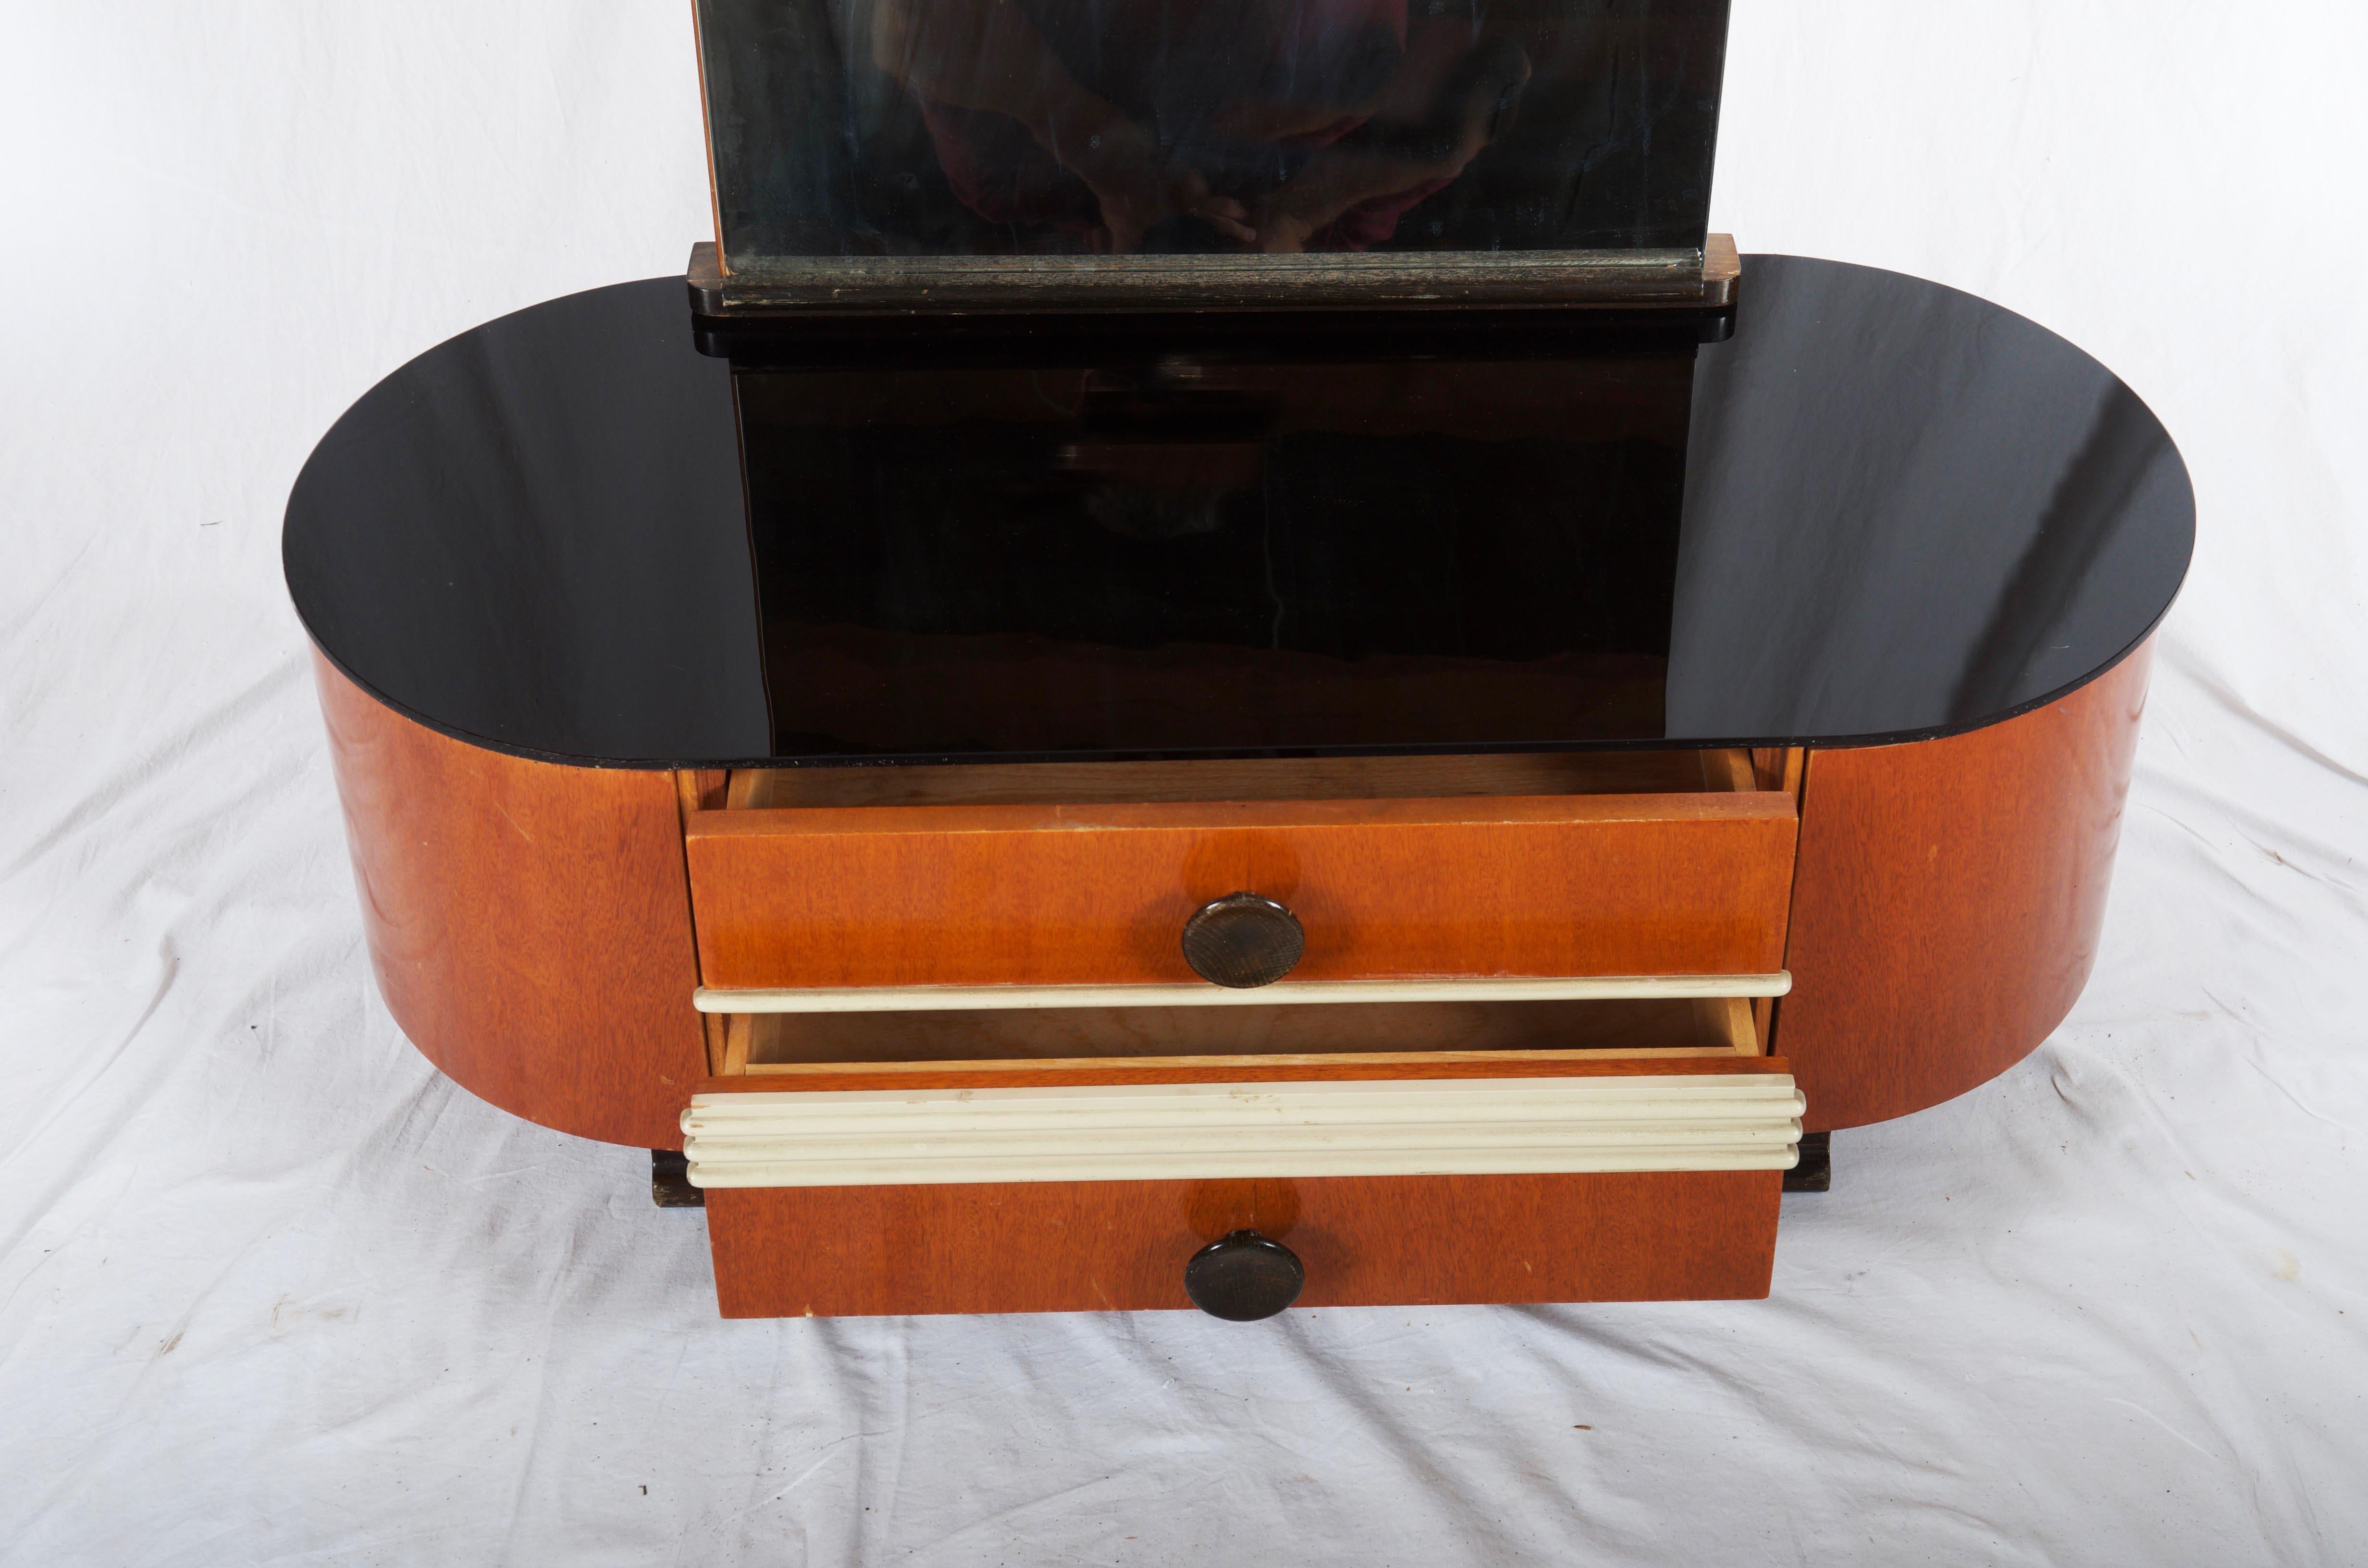 Wood construction with two drawers, black glass top, and lager mirror. Designed by Jindrich Halabala in the 1930s for UP-Závody.
Original unrestored condition.